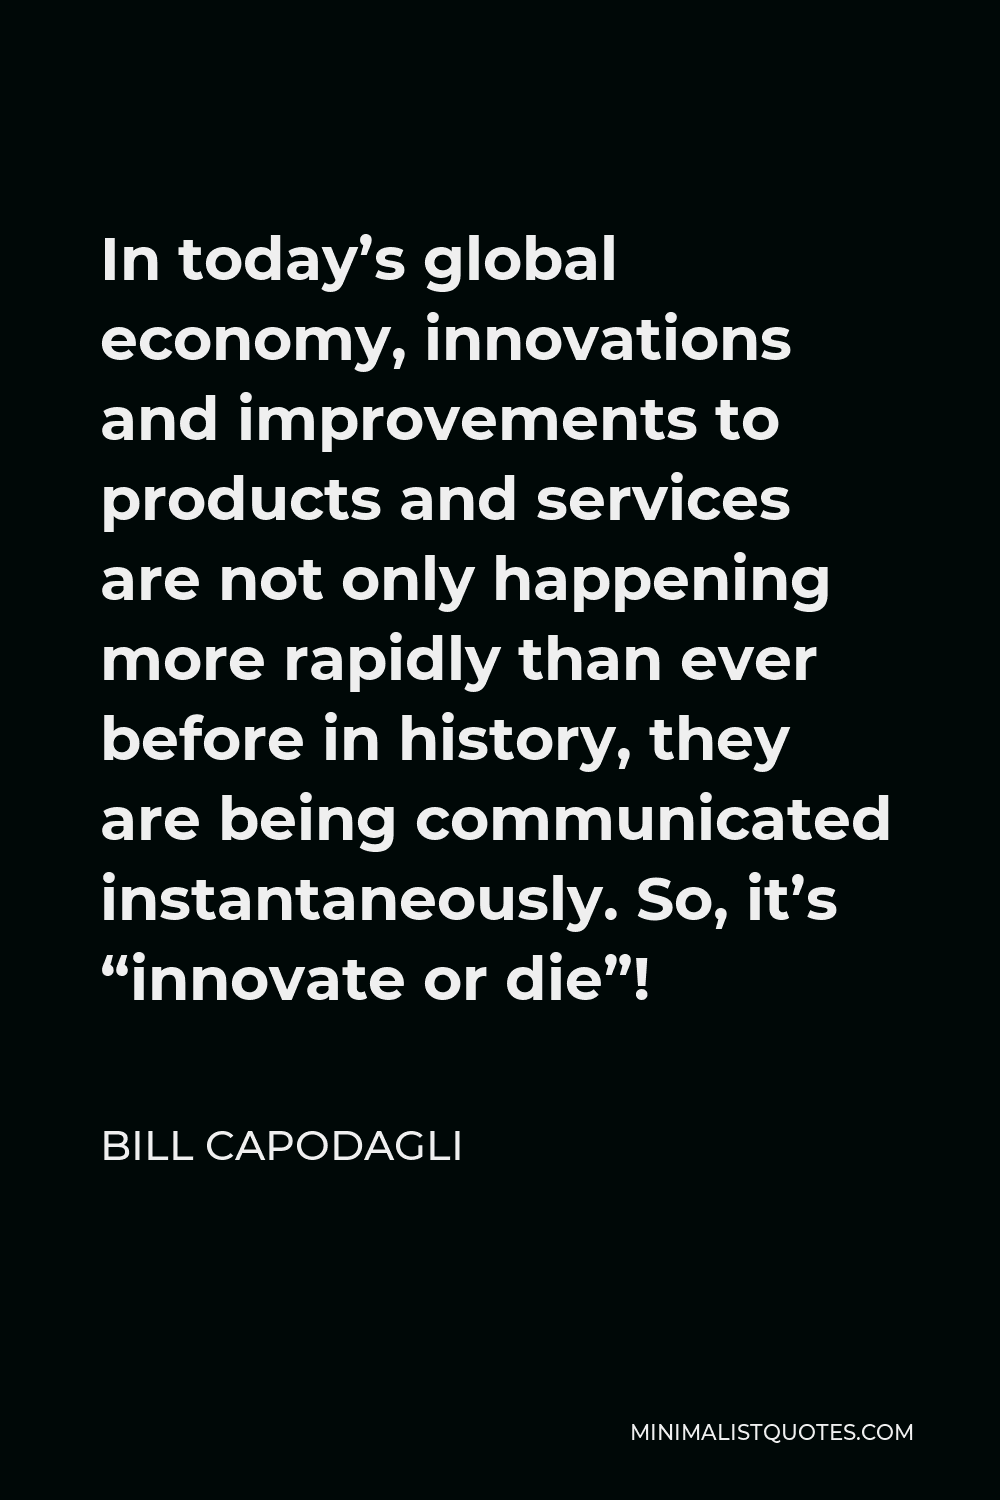 Bill Capodagli Quote - In today’s global economy, innovations and improvements to products and services are not only happening more rapidly than ever before in history, they are being communicated instantaneously. So, it’s “innovate or die”!